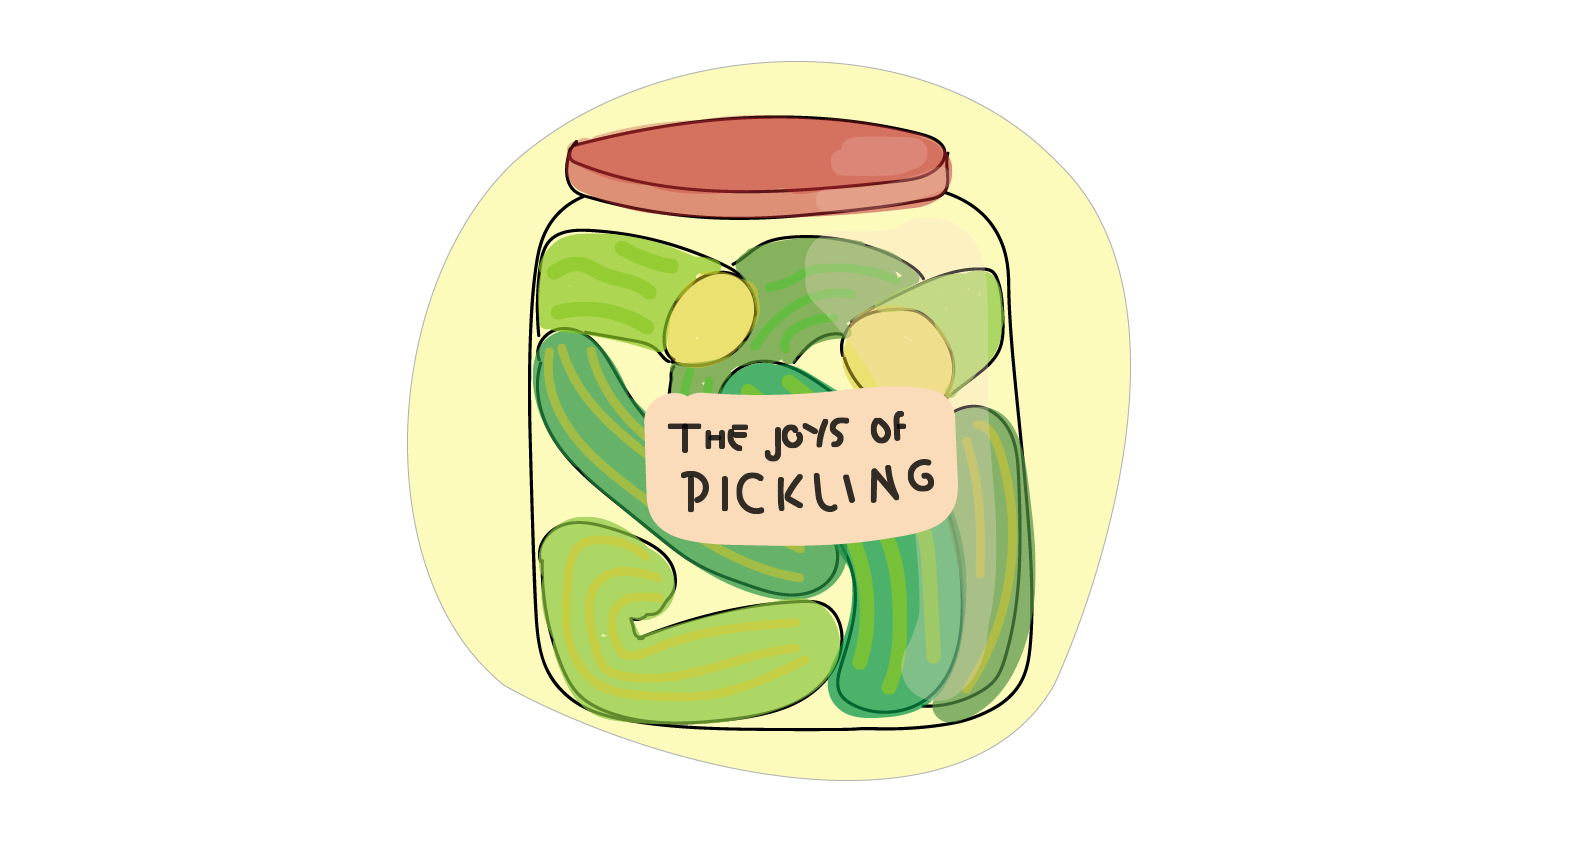 article-covers/the-joys-of-pickling.jpg